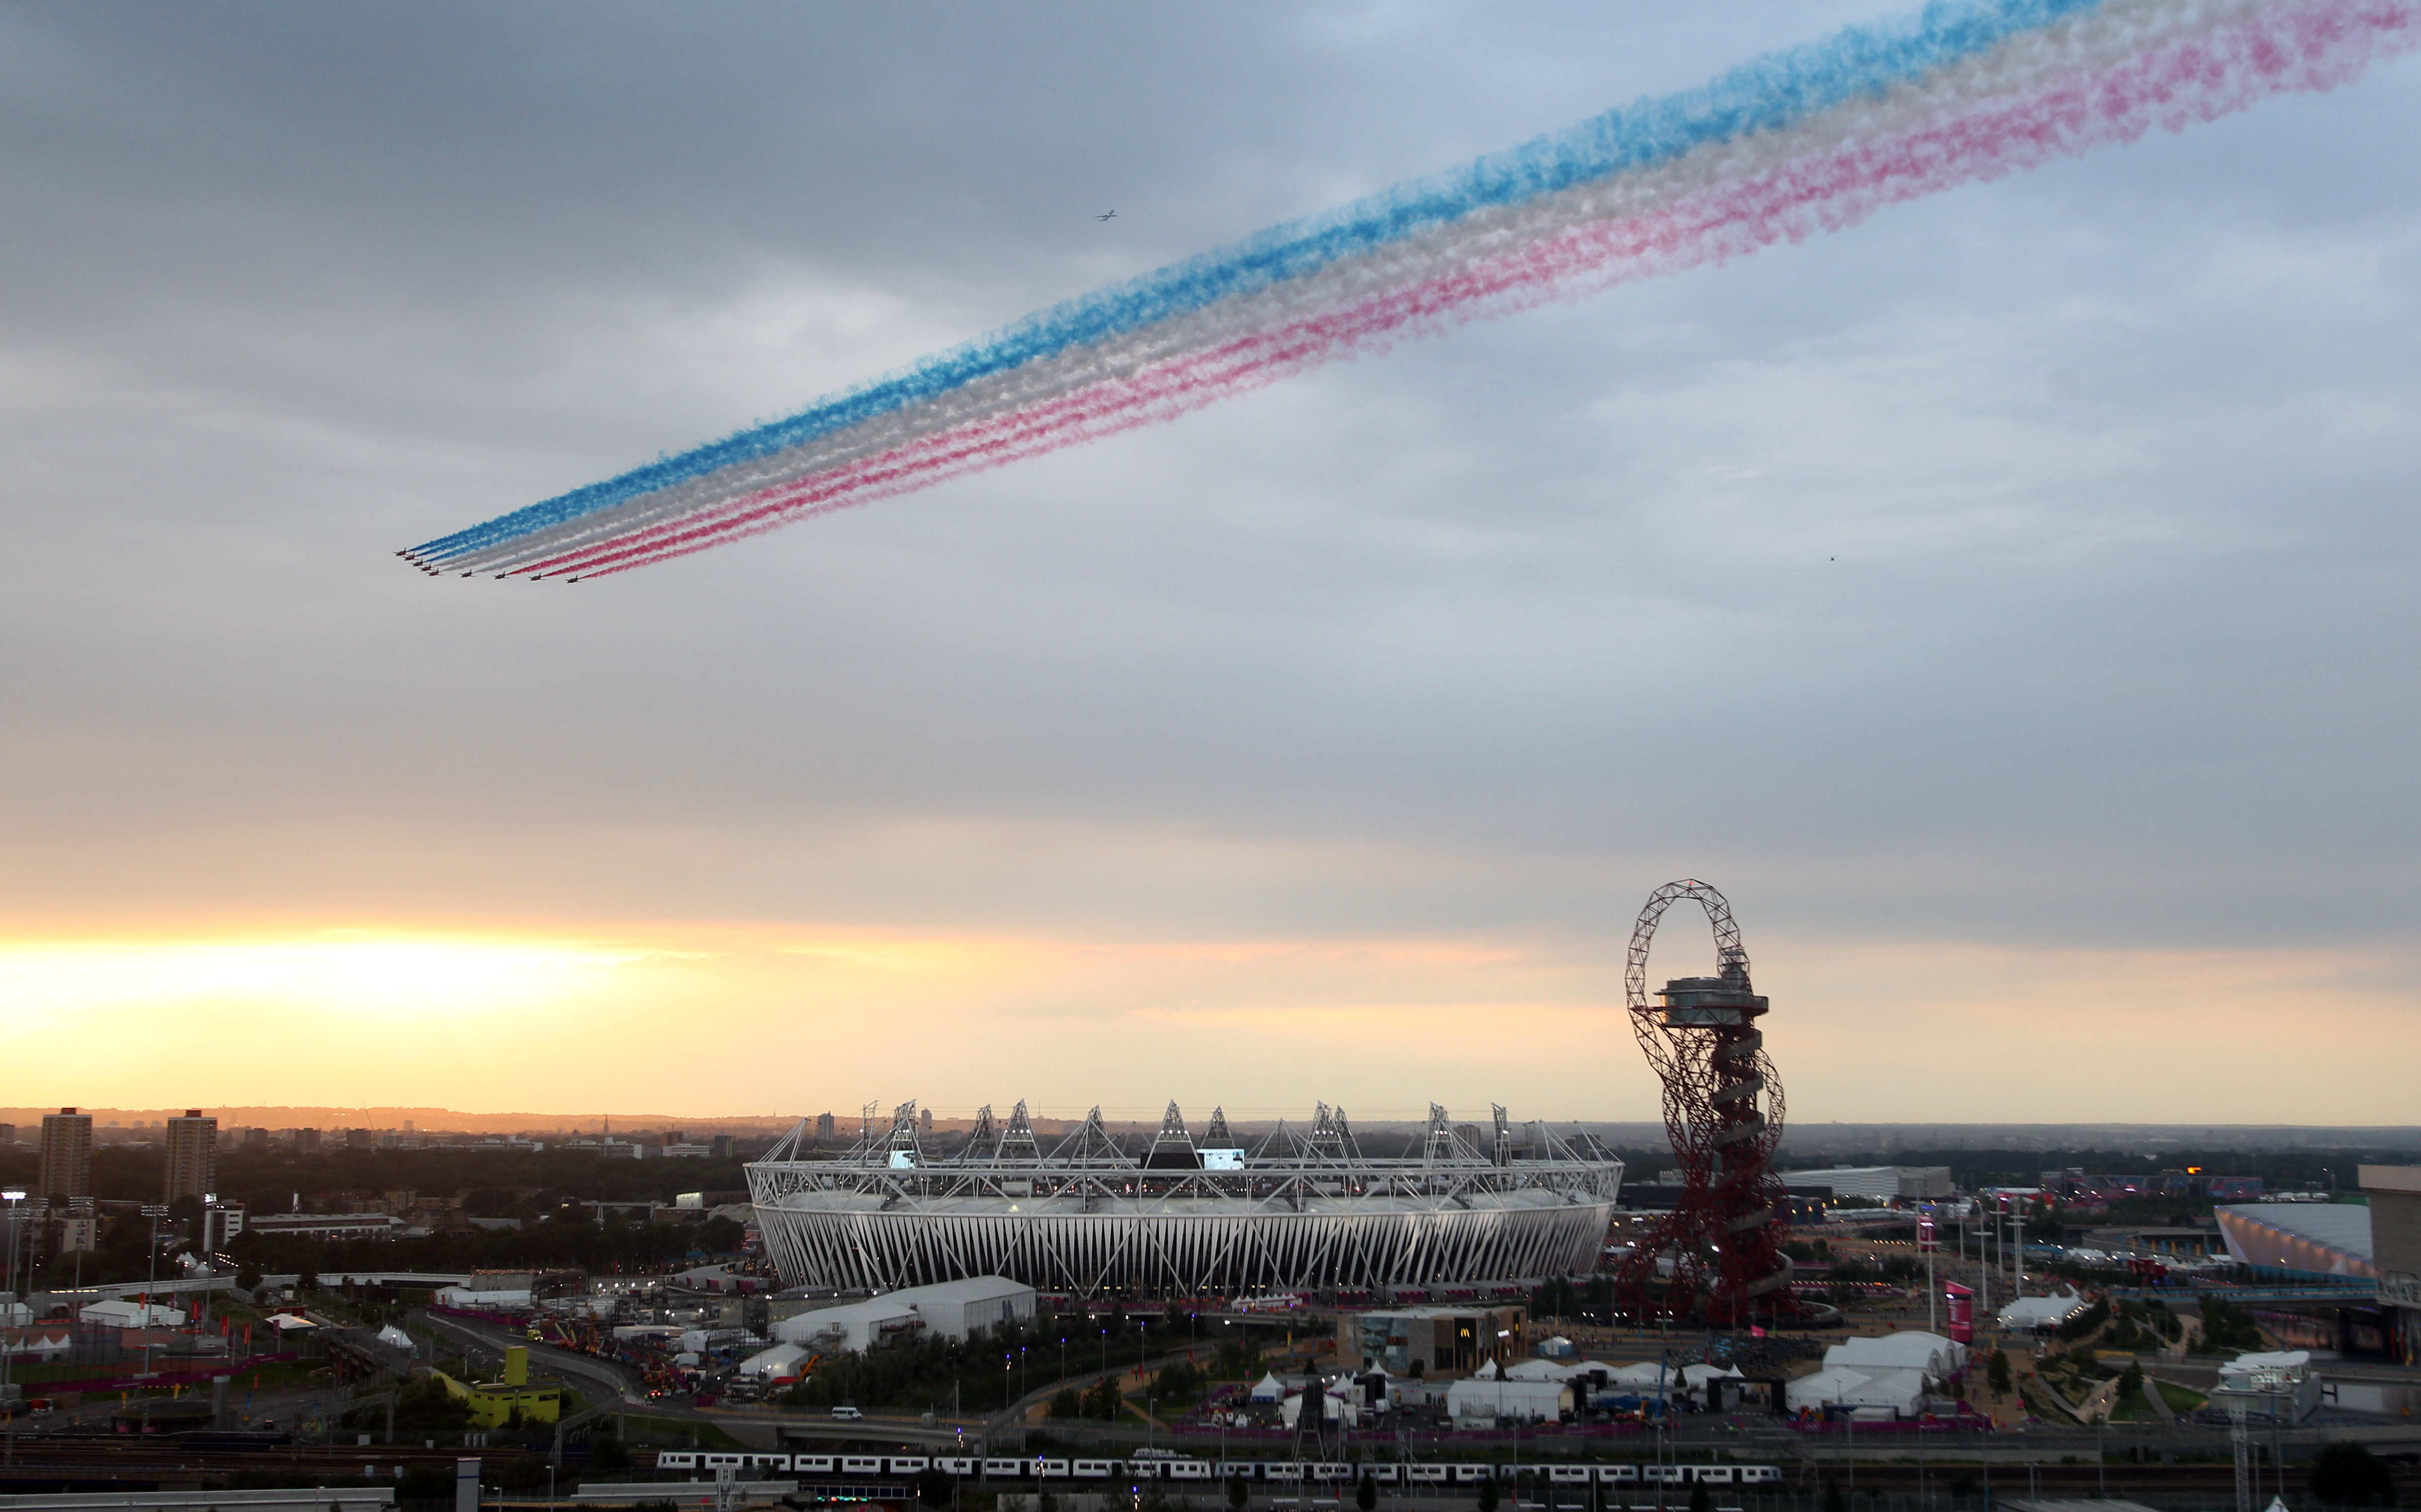 The Red Arrows perform a flypast over the Olympic Park in London 